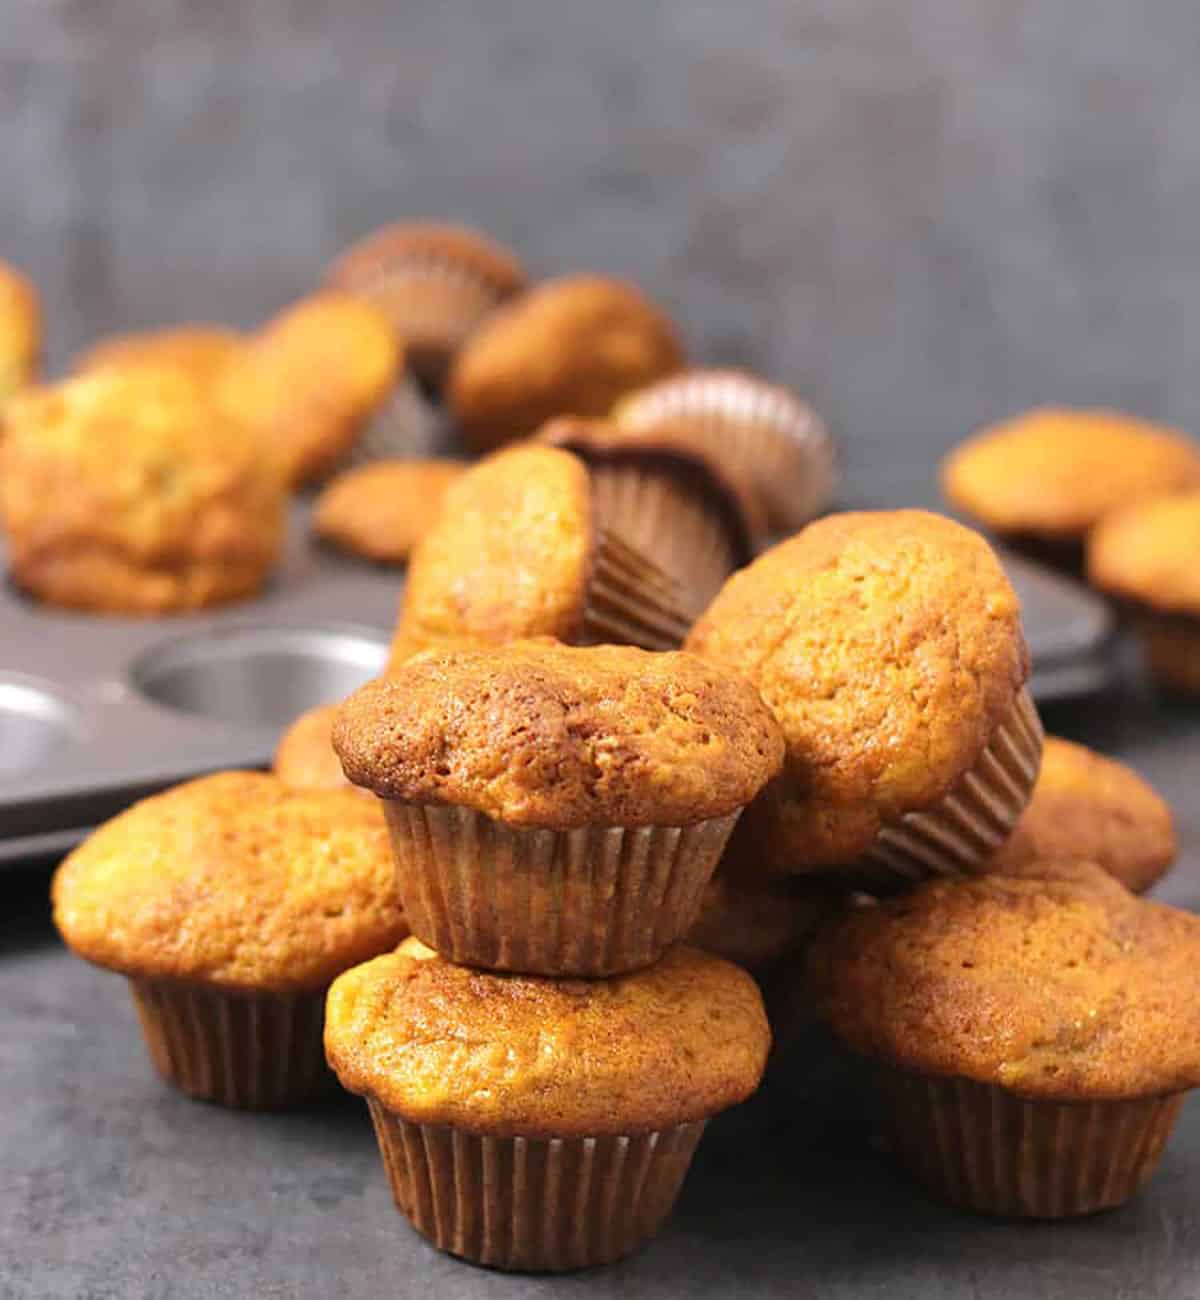 tastiest banana muffins baked to perfection are placed in a pile.